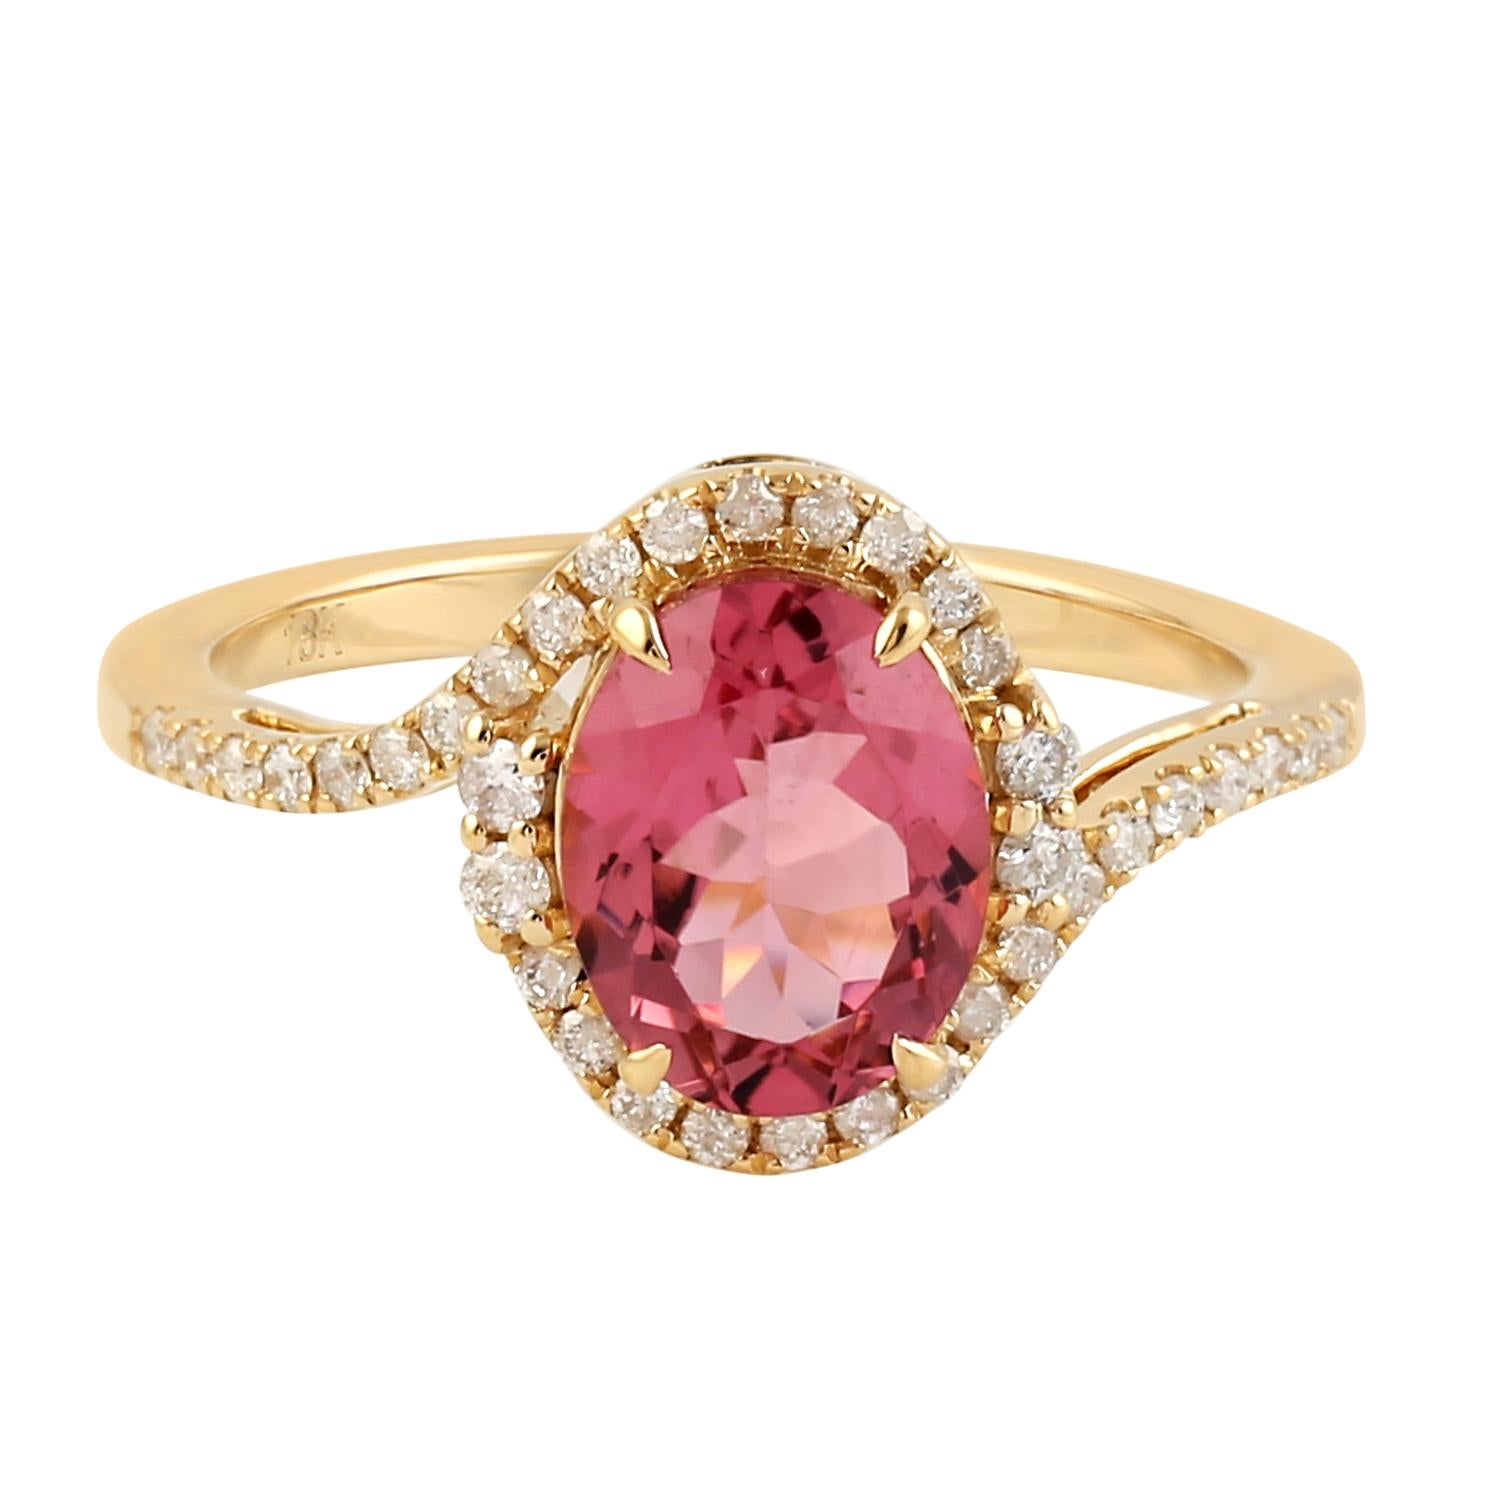 Women's Center Stone Pink Tourmaline Ring with Pave DIamond Made in 18k Gold For Sale